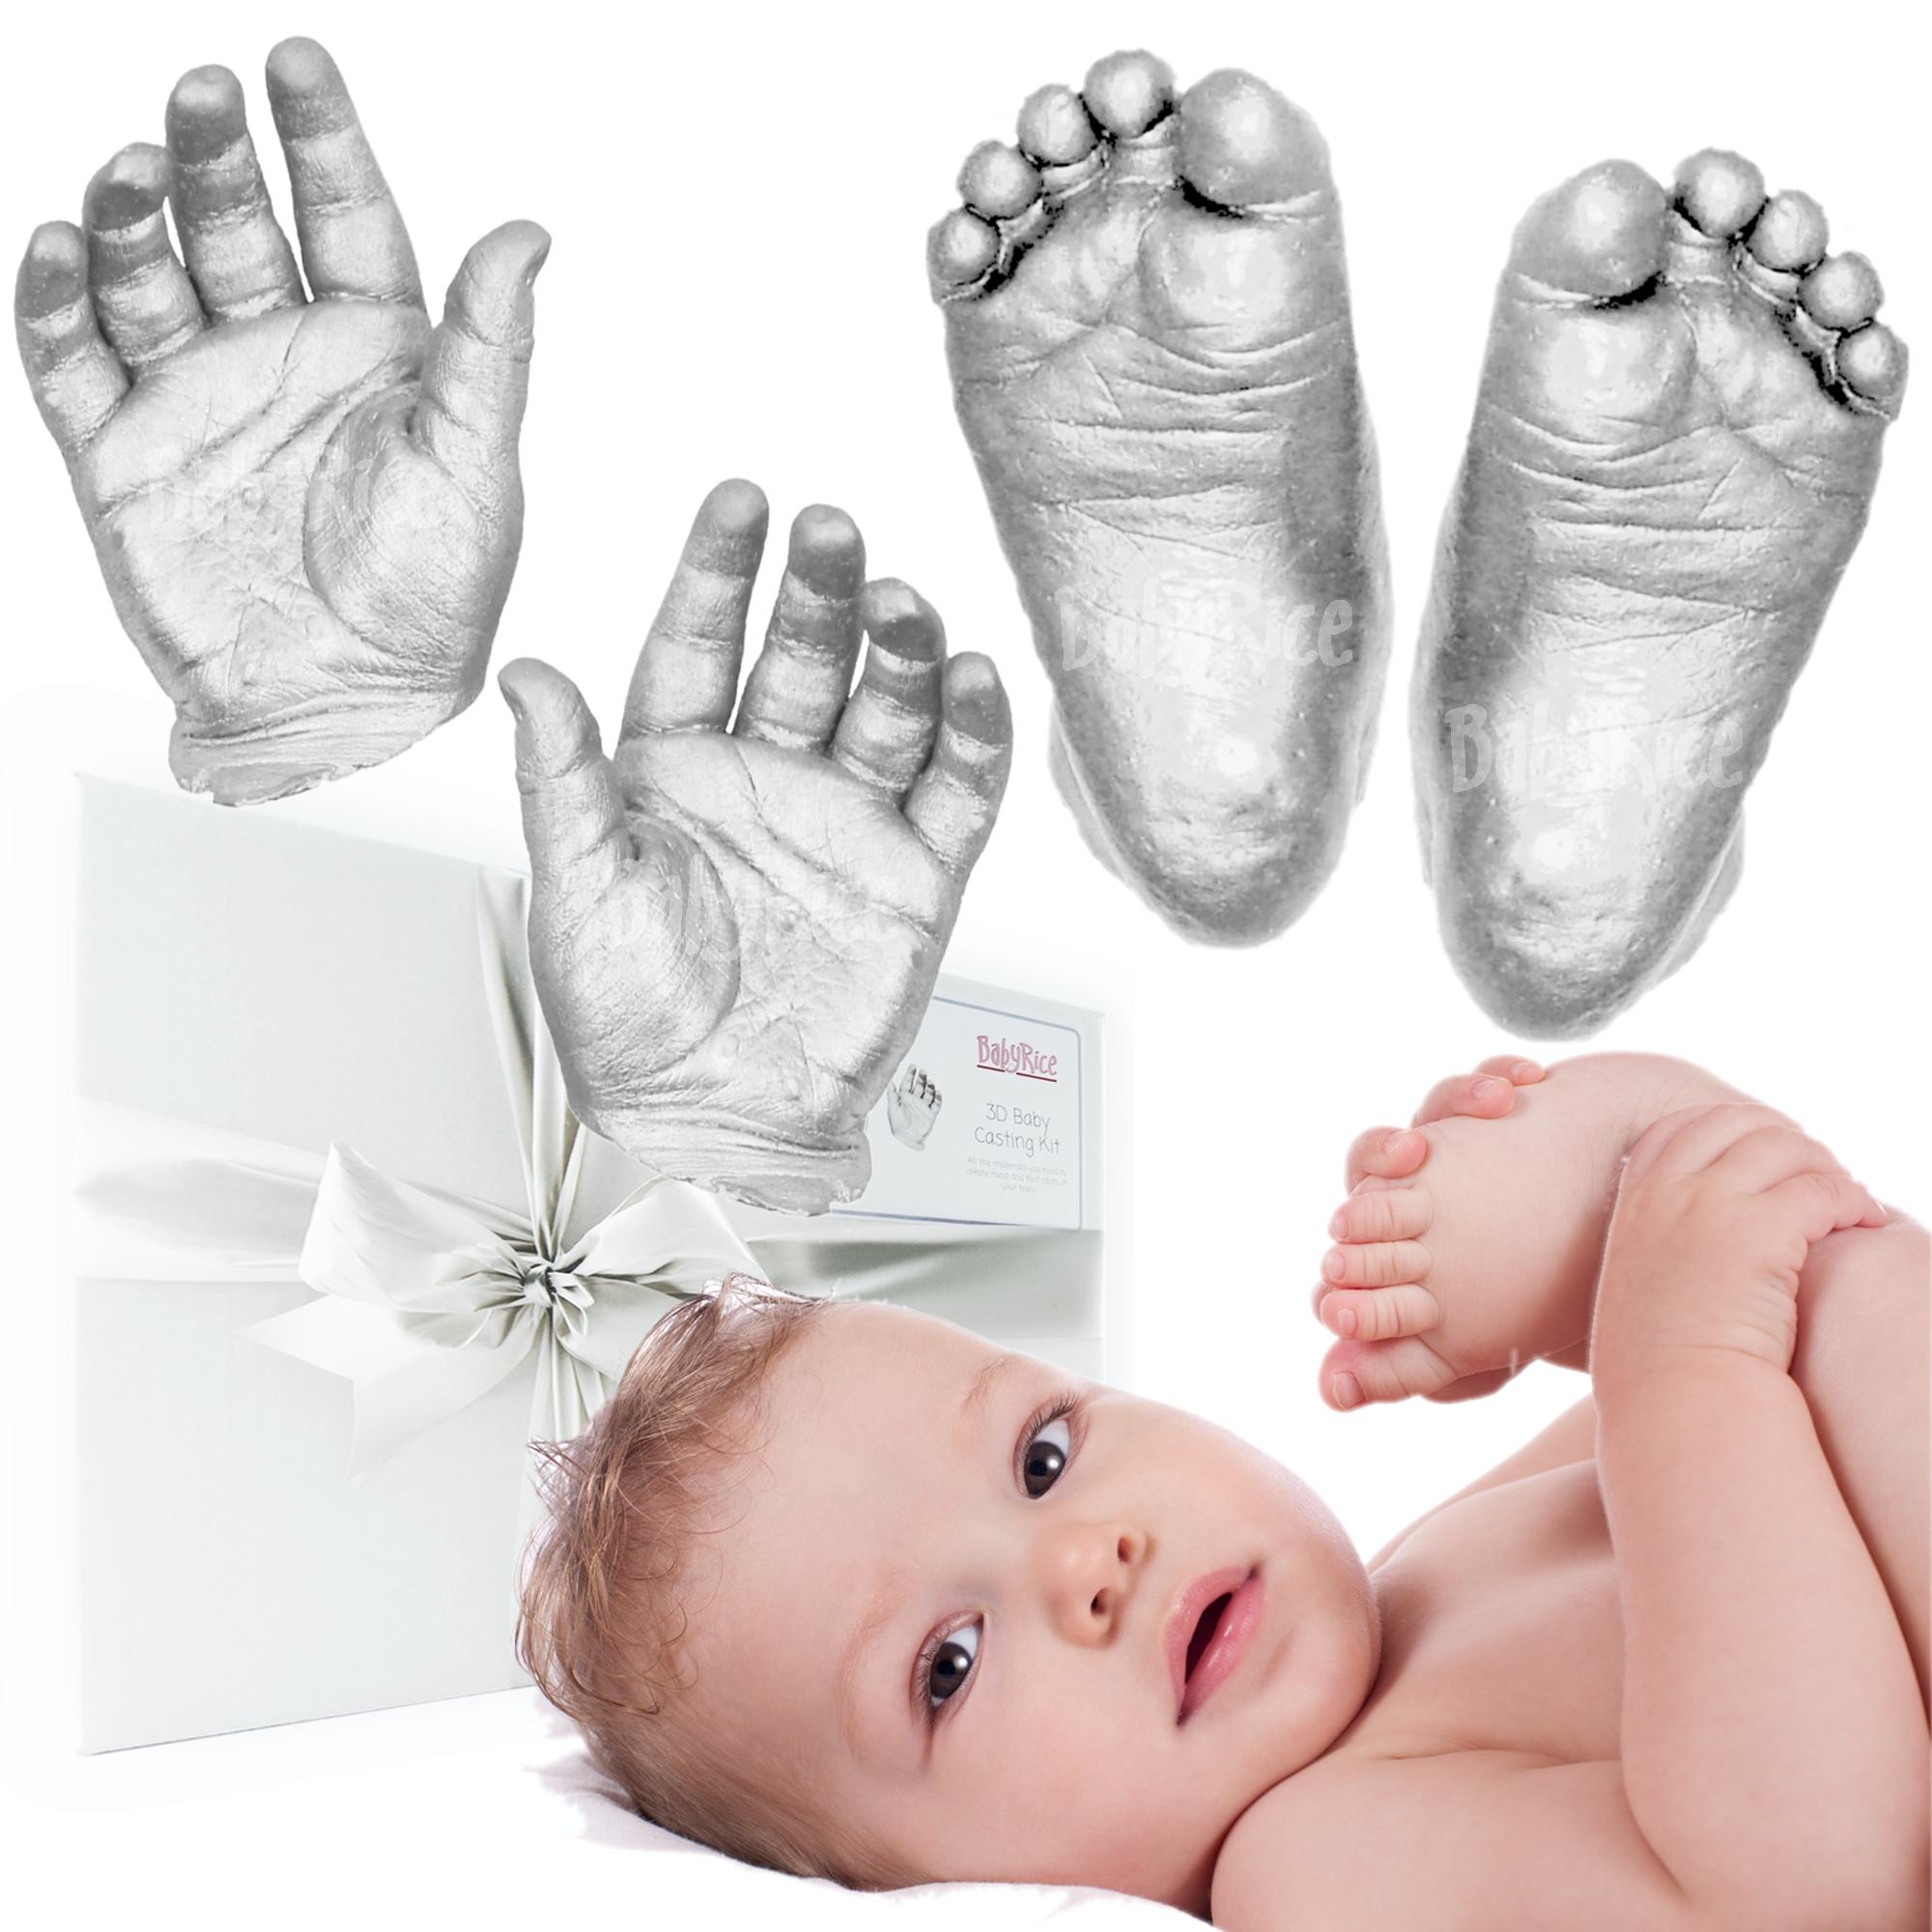 Momspresent Baby Hand Print and Foot Print Deluxe Casting kit with White Frame10 